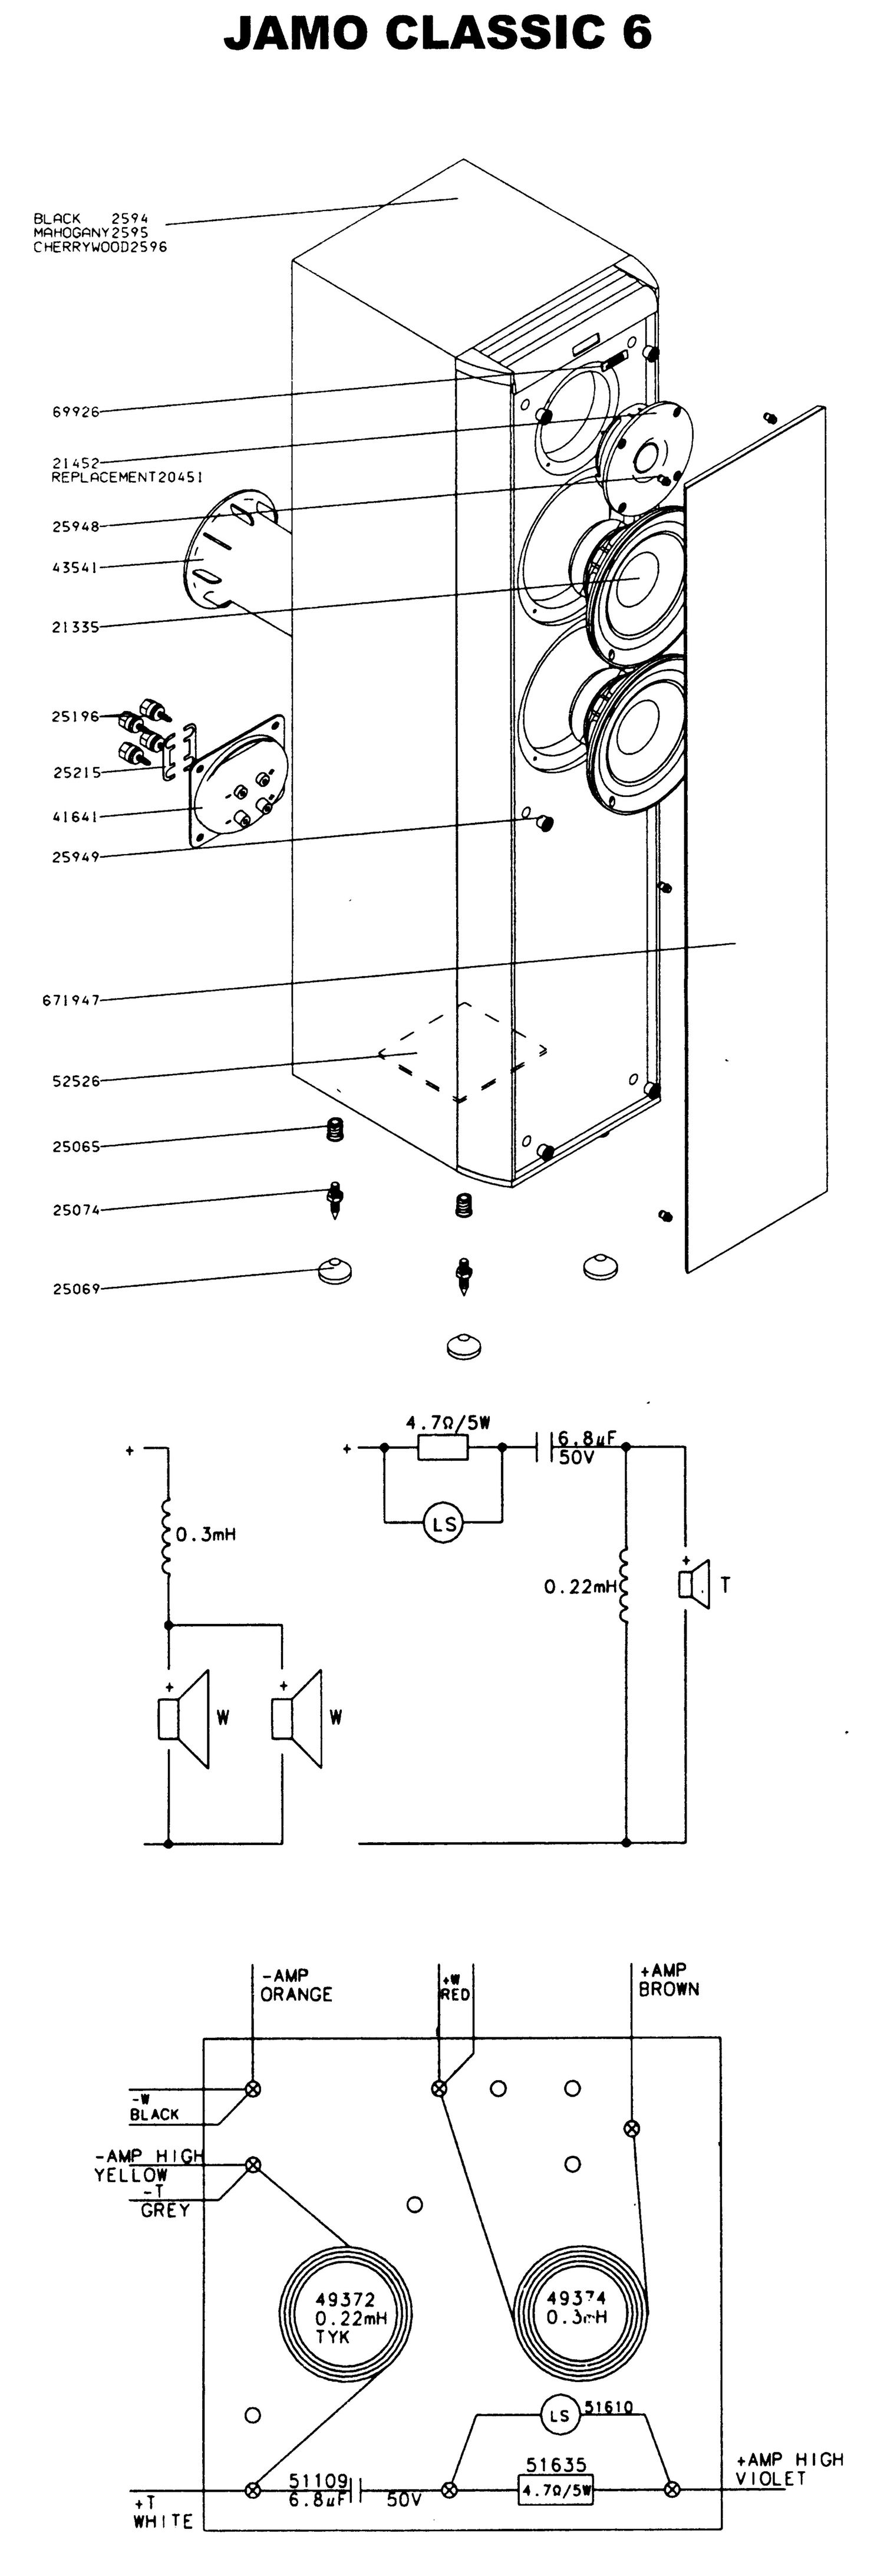 jamo classic 6 schematic assembly